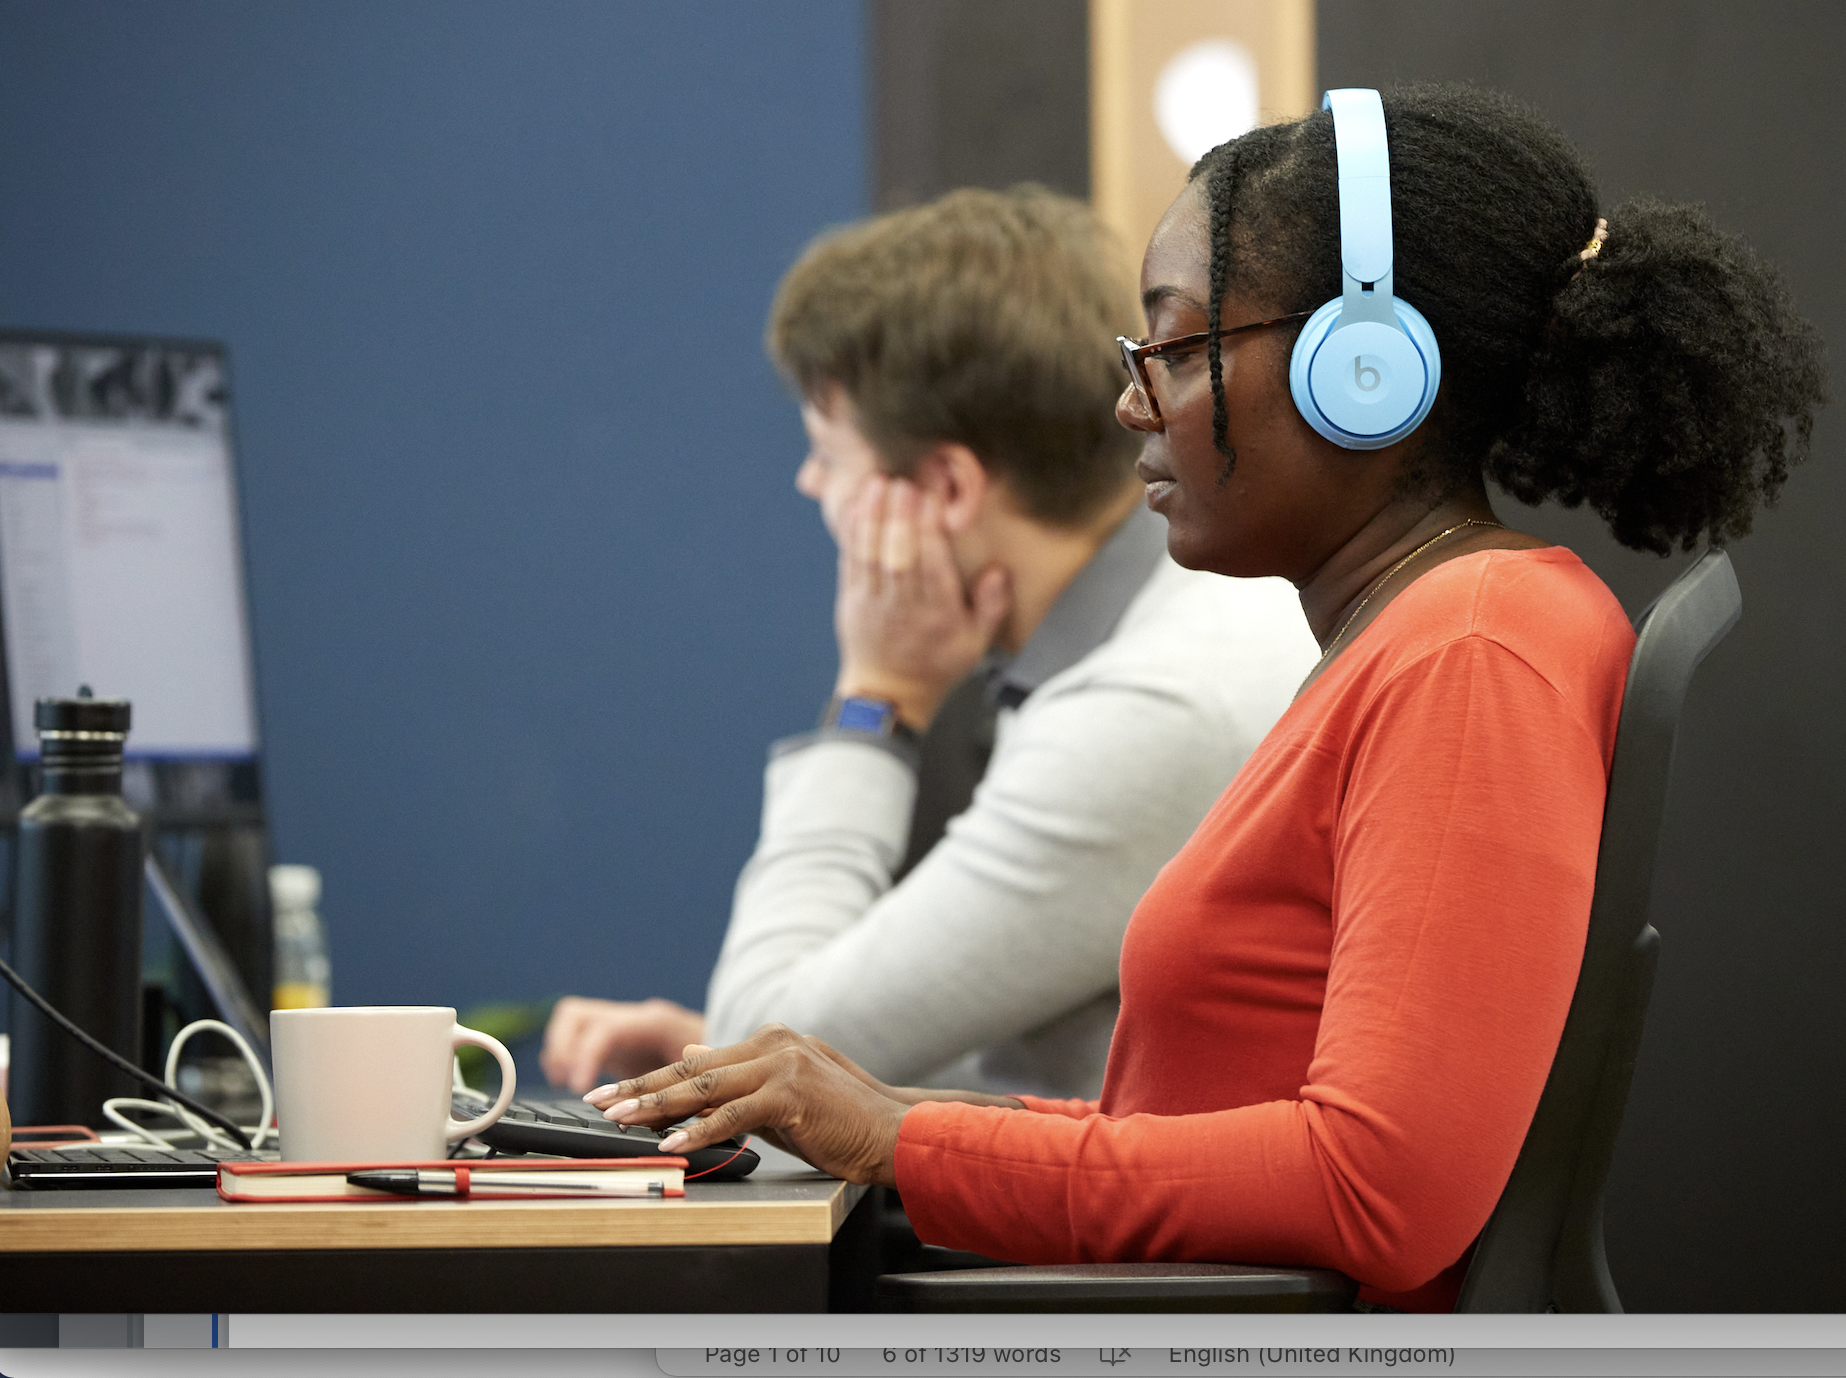 A photo of a woman working on her laptop at the desk, wearing bright blue headphones.